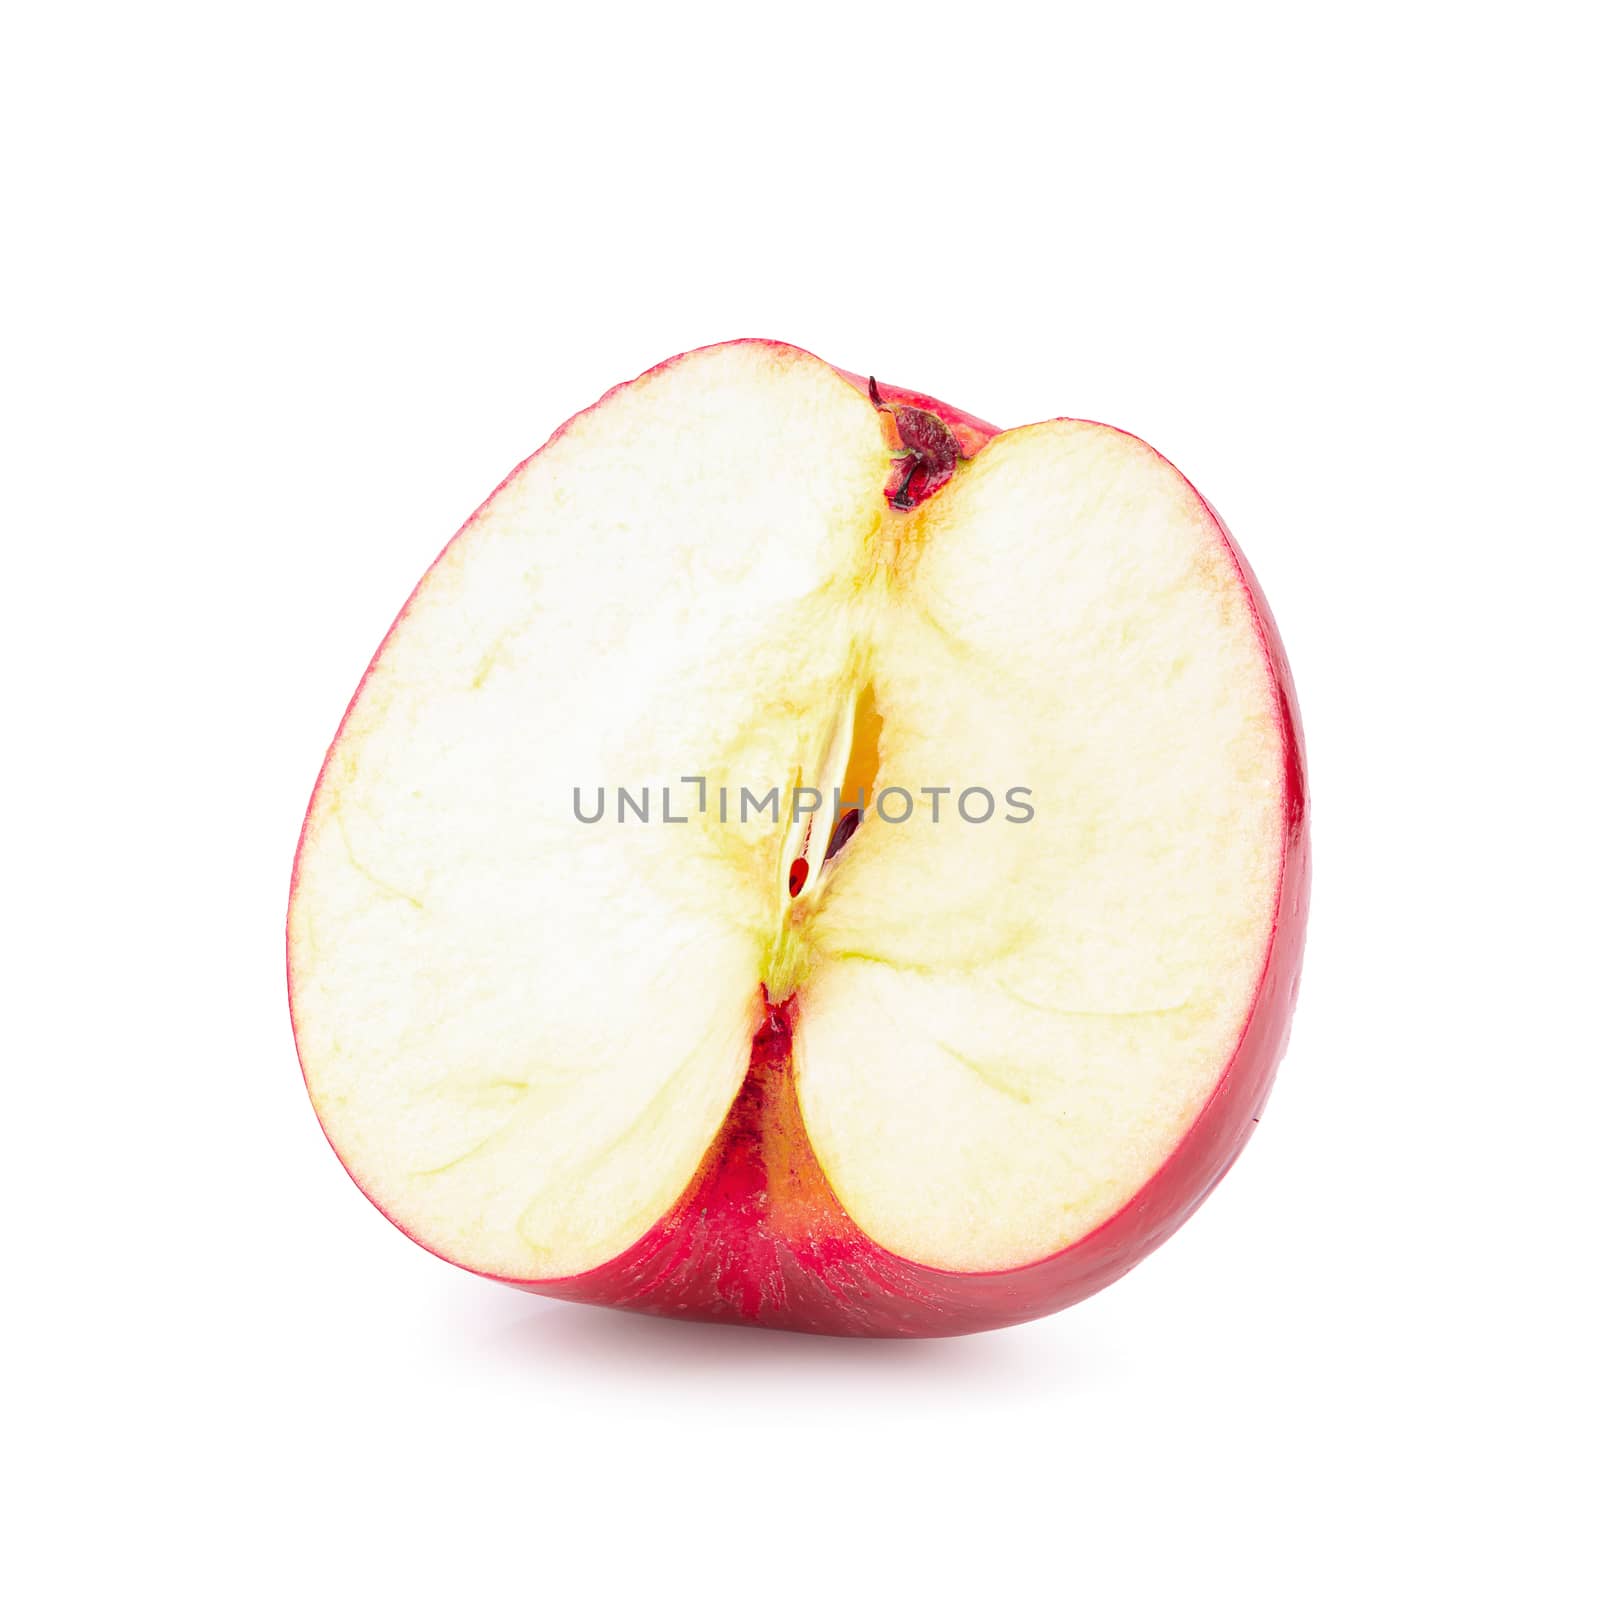 Red apple whole pieces isolated over white background.